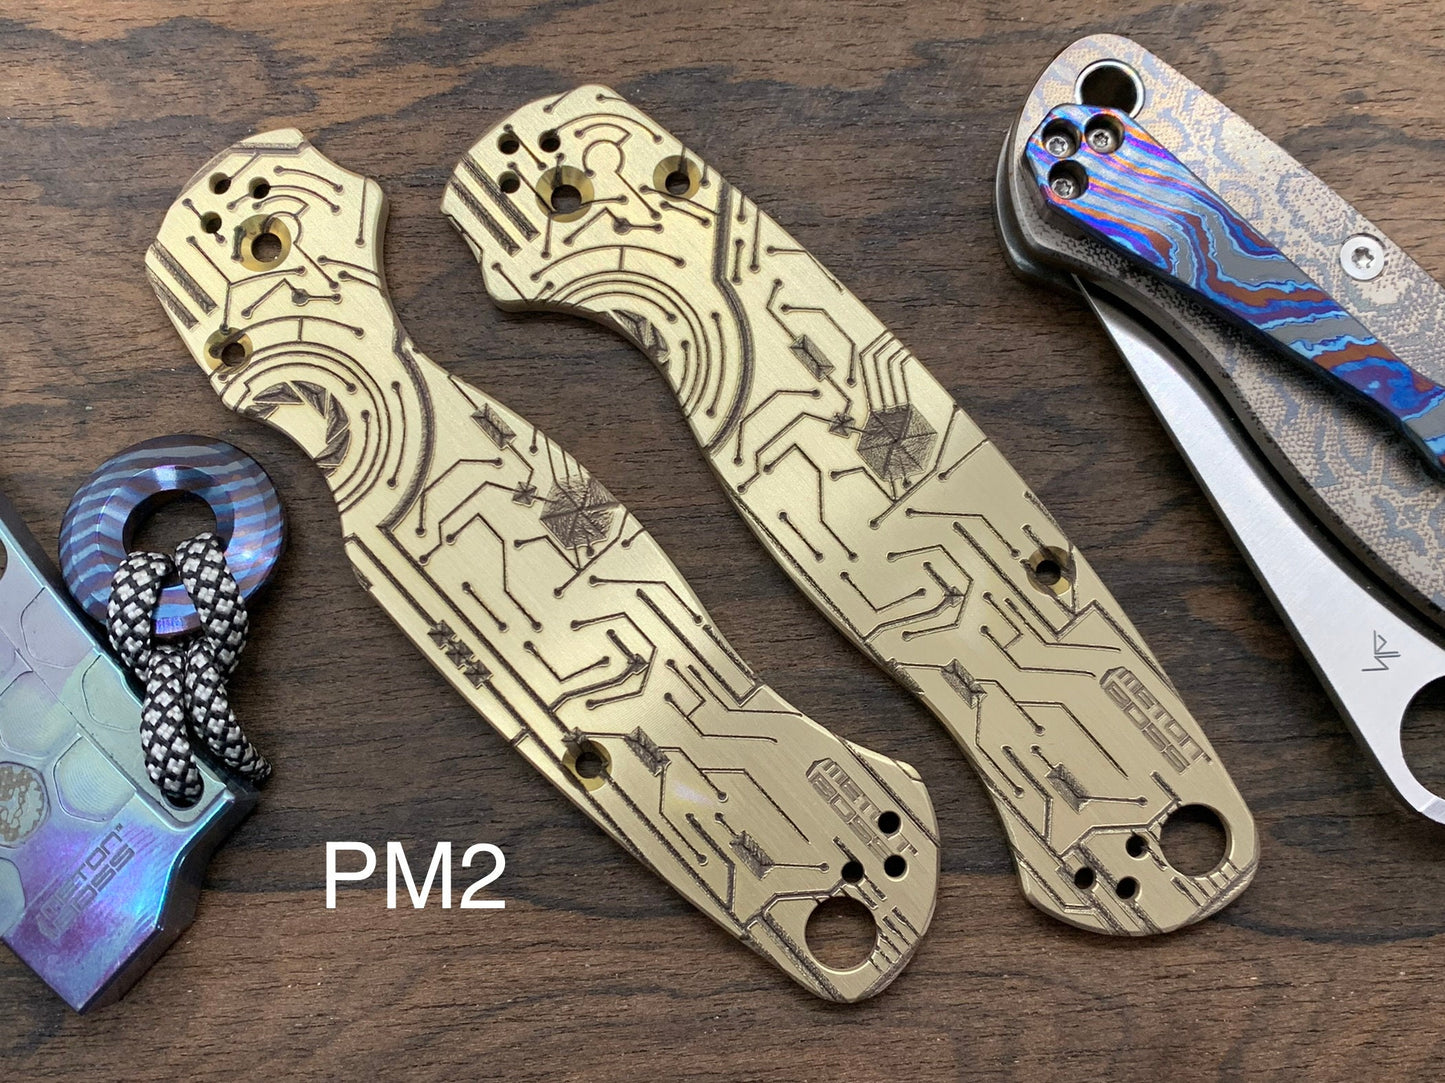 CIRCUIT BOARD engraved Brass Scales for Spyderco Paramilitary 2 PM2